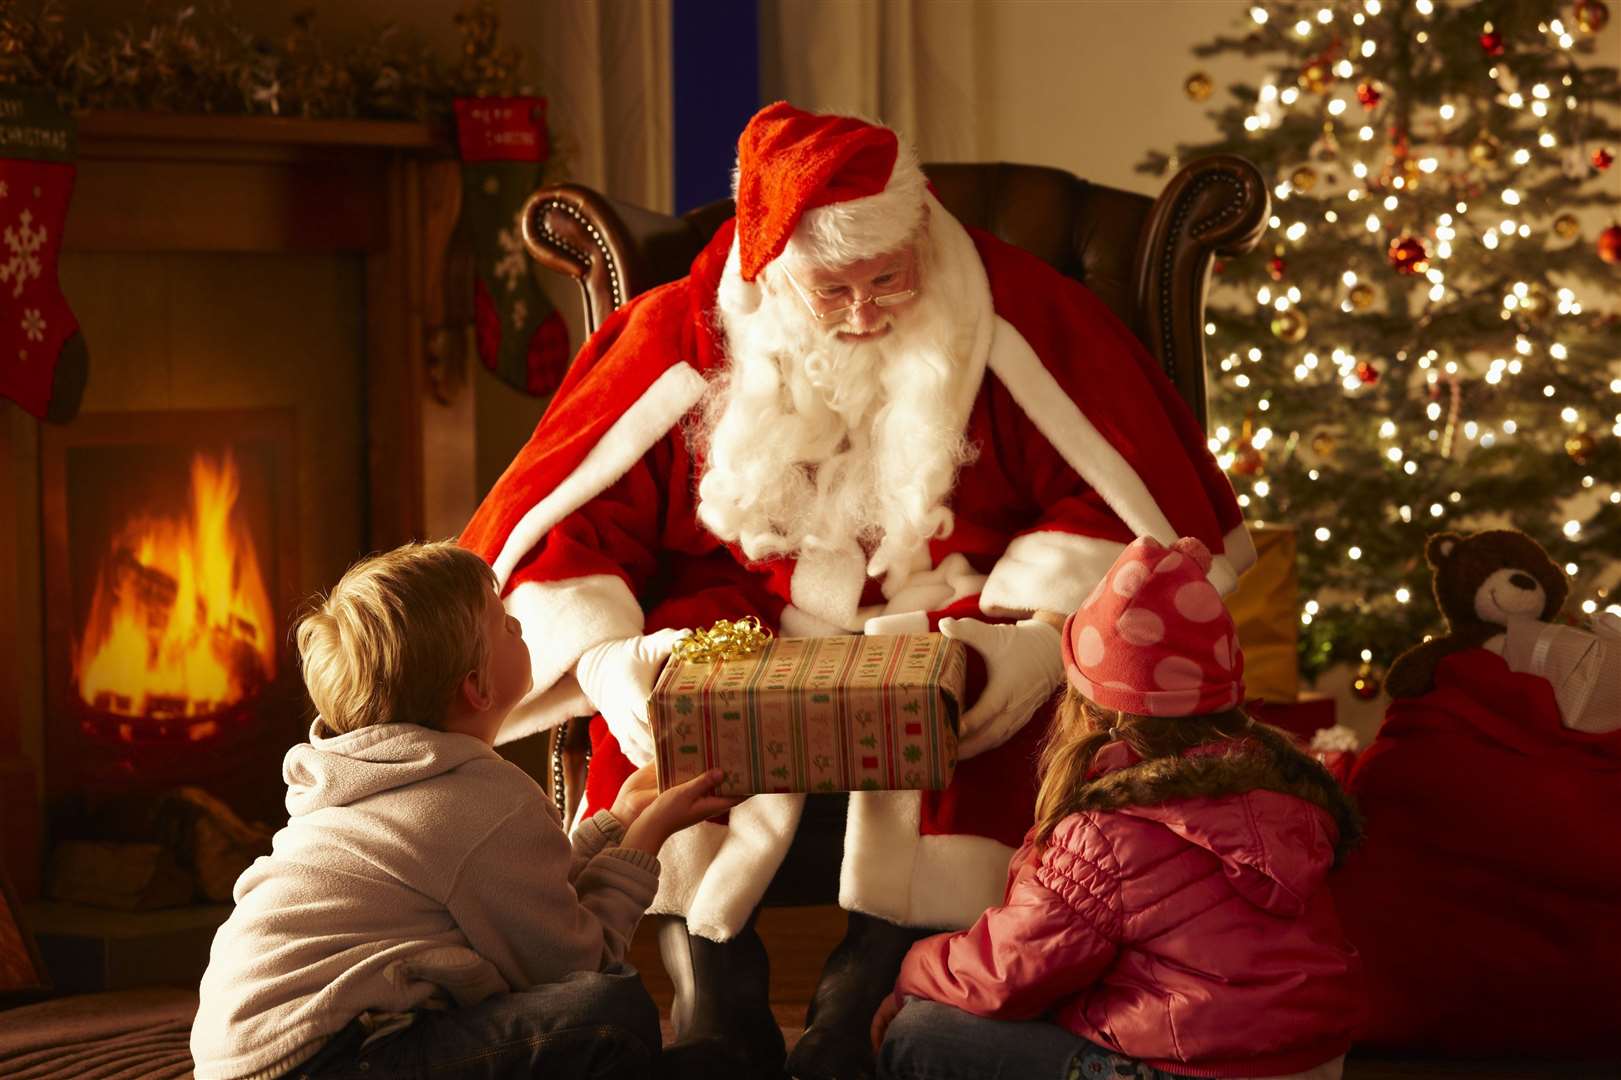 Father Christmas will be giving children gifts Picture: iStock/stocknroll